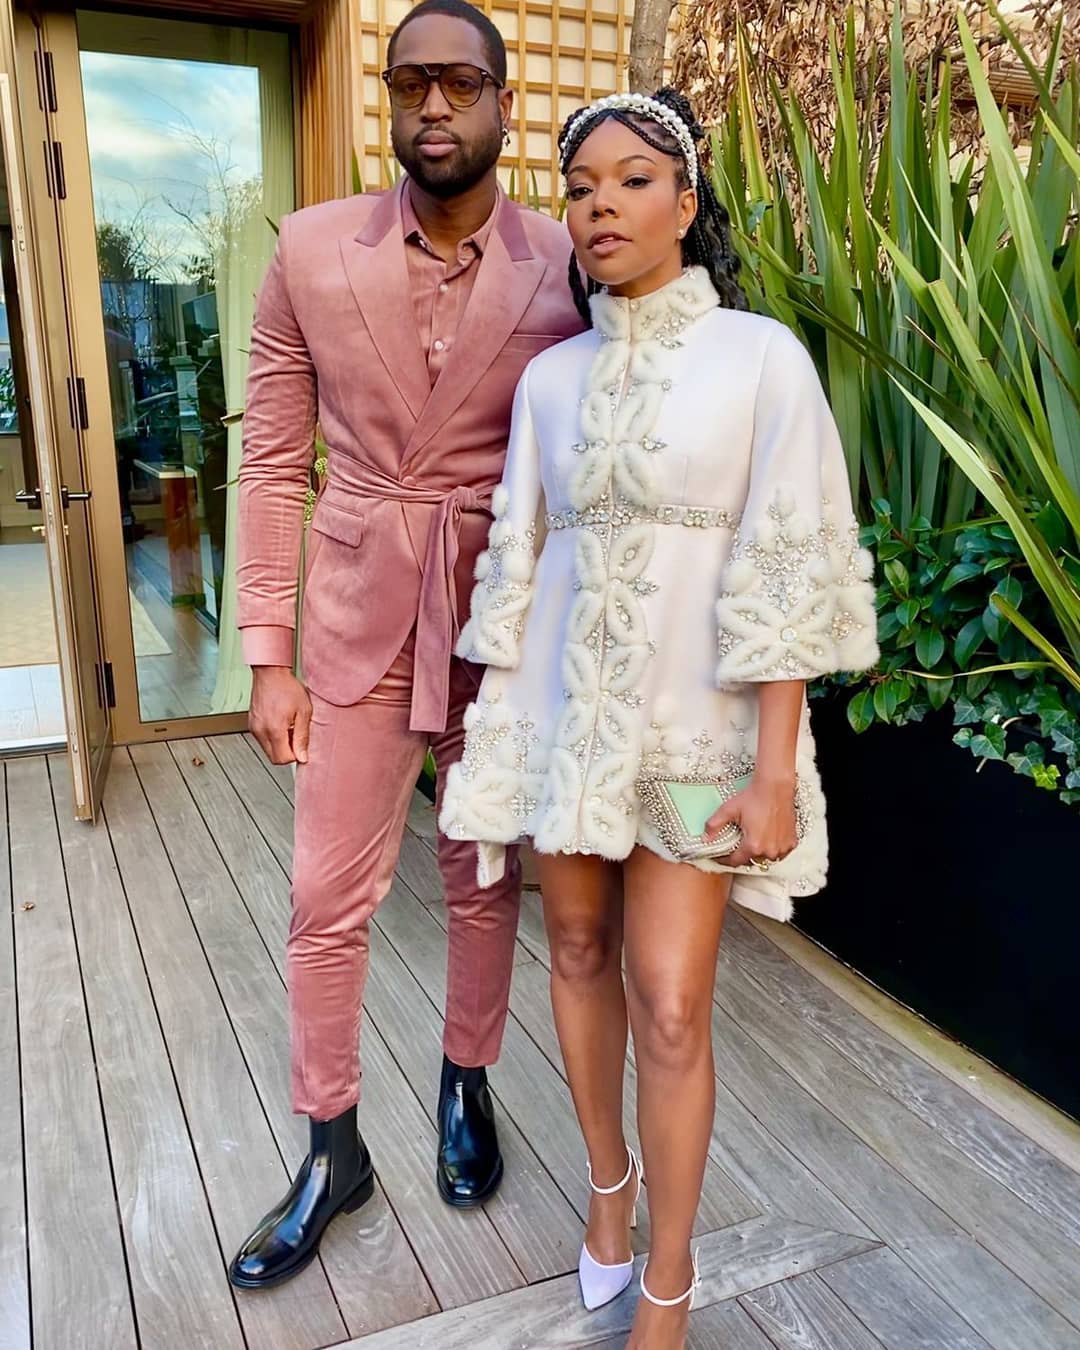 Hollywood American actress voice artist activist author Gabrielle Union attended the Ralph & Russo Paris fashion week show  husband American former professional basketball player Dwyane Wade Mae Cassidy, Botanical Mint & Silver Zeenat Clutch bag handbag ⁣Stylist Thomas Christos styled intricately detailed white couture Ralph & Russo cape dress Lilac court shoes Kenneth Soh Makeup and Hair pearl detail headband pink velvet layered look tie-waist slim-fit trouser suit shirt white socks black leather pull-on boots sunglasses. Botanical Mint Moonstone Lilac Coral Dreams Power Pink silver antique gold